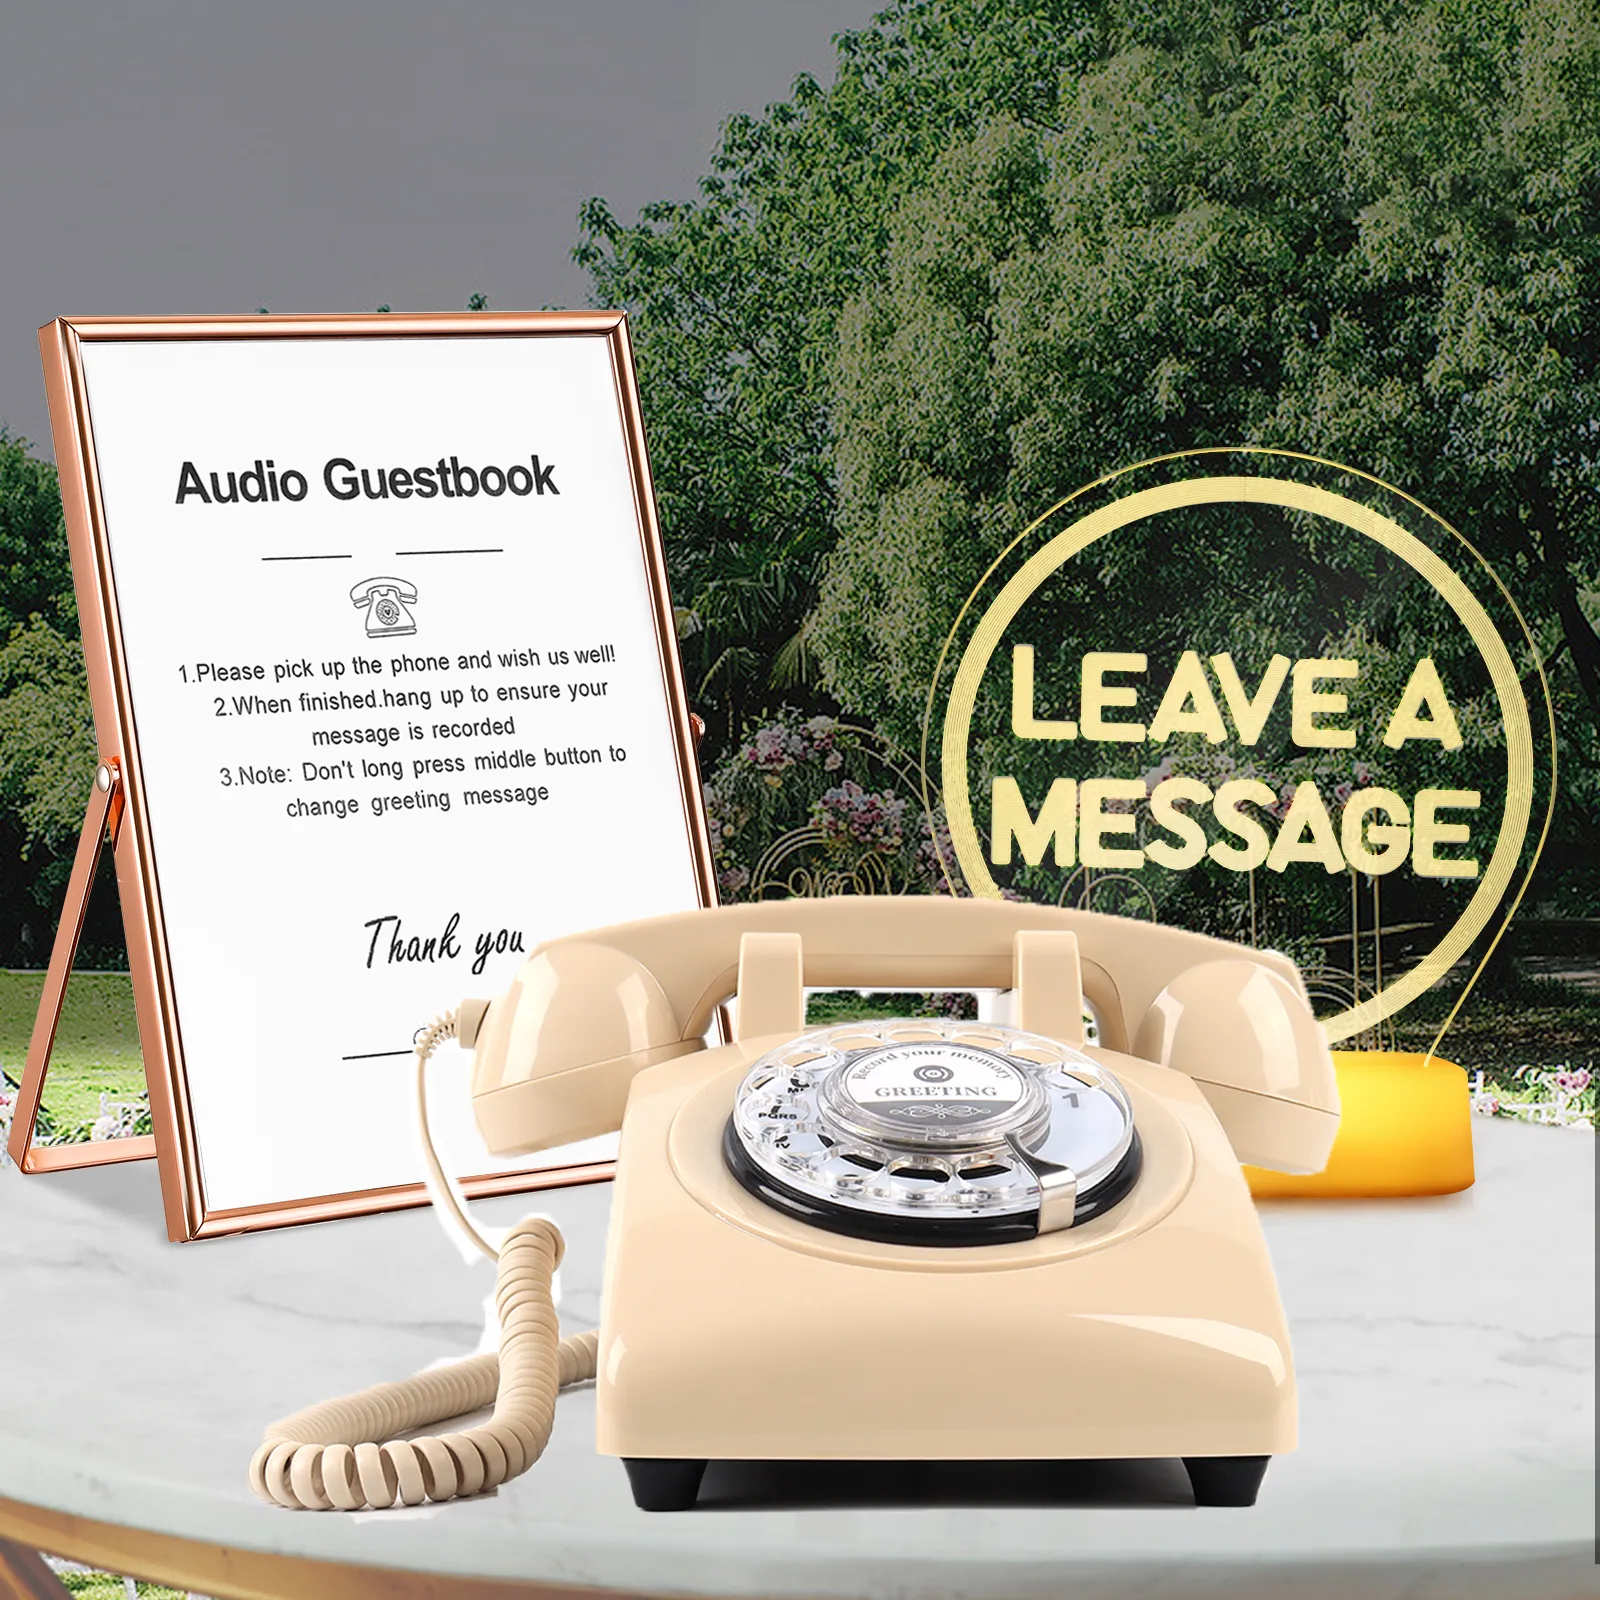 Premium Audio GuestBook Telephone with Free LED Wedding Sign and A5 Vertical Photo Frame | Vintage and Retro Style Audio Guestbook